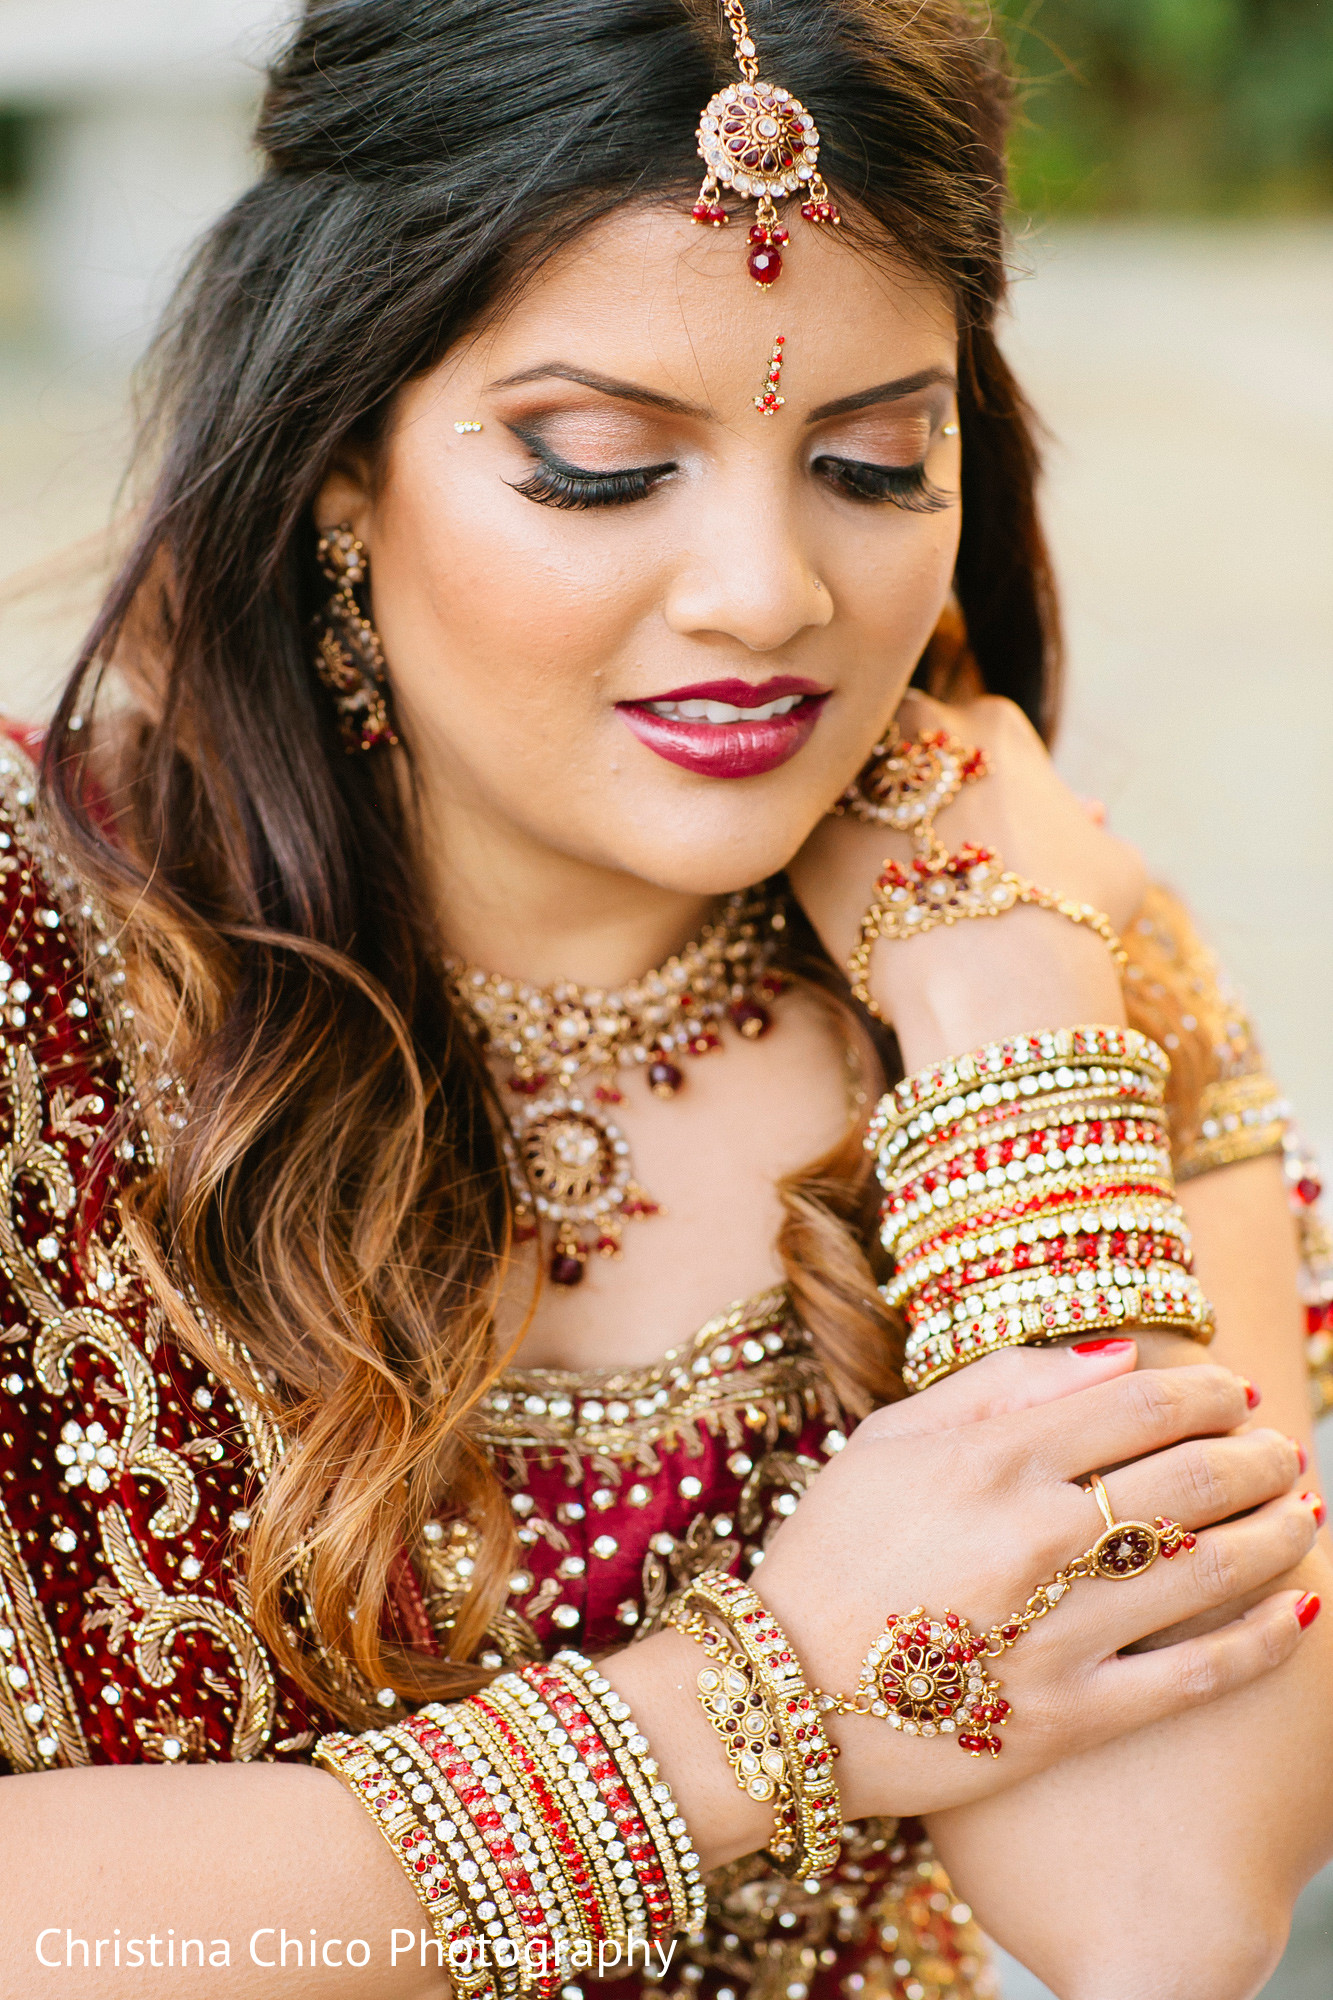 Wonderful Indian traditional jewelry in close-up photos: maang tikka,  bangles, earrings, nose rings, etc - Nationalclothing.org